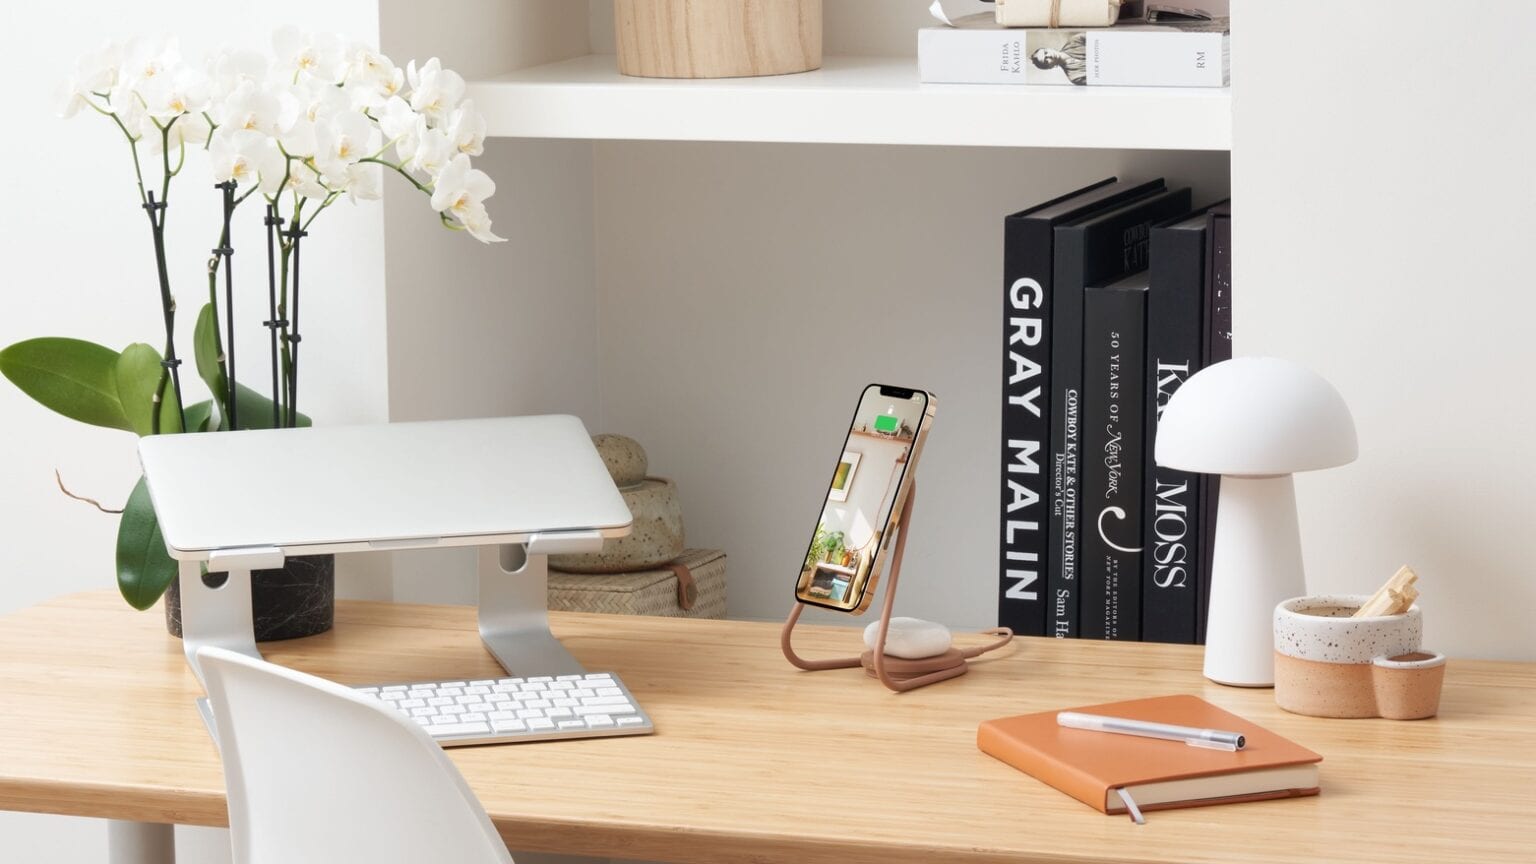 Courant Mag:2 is the most elegant iPhone stand yet